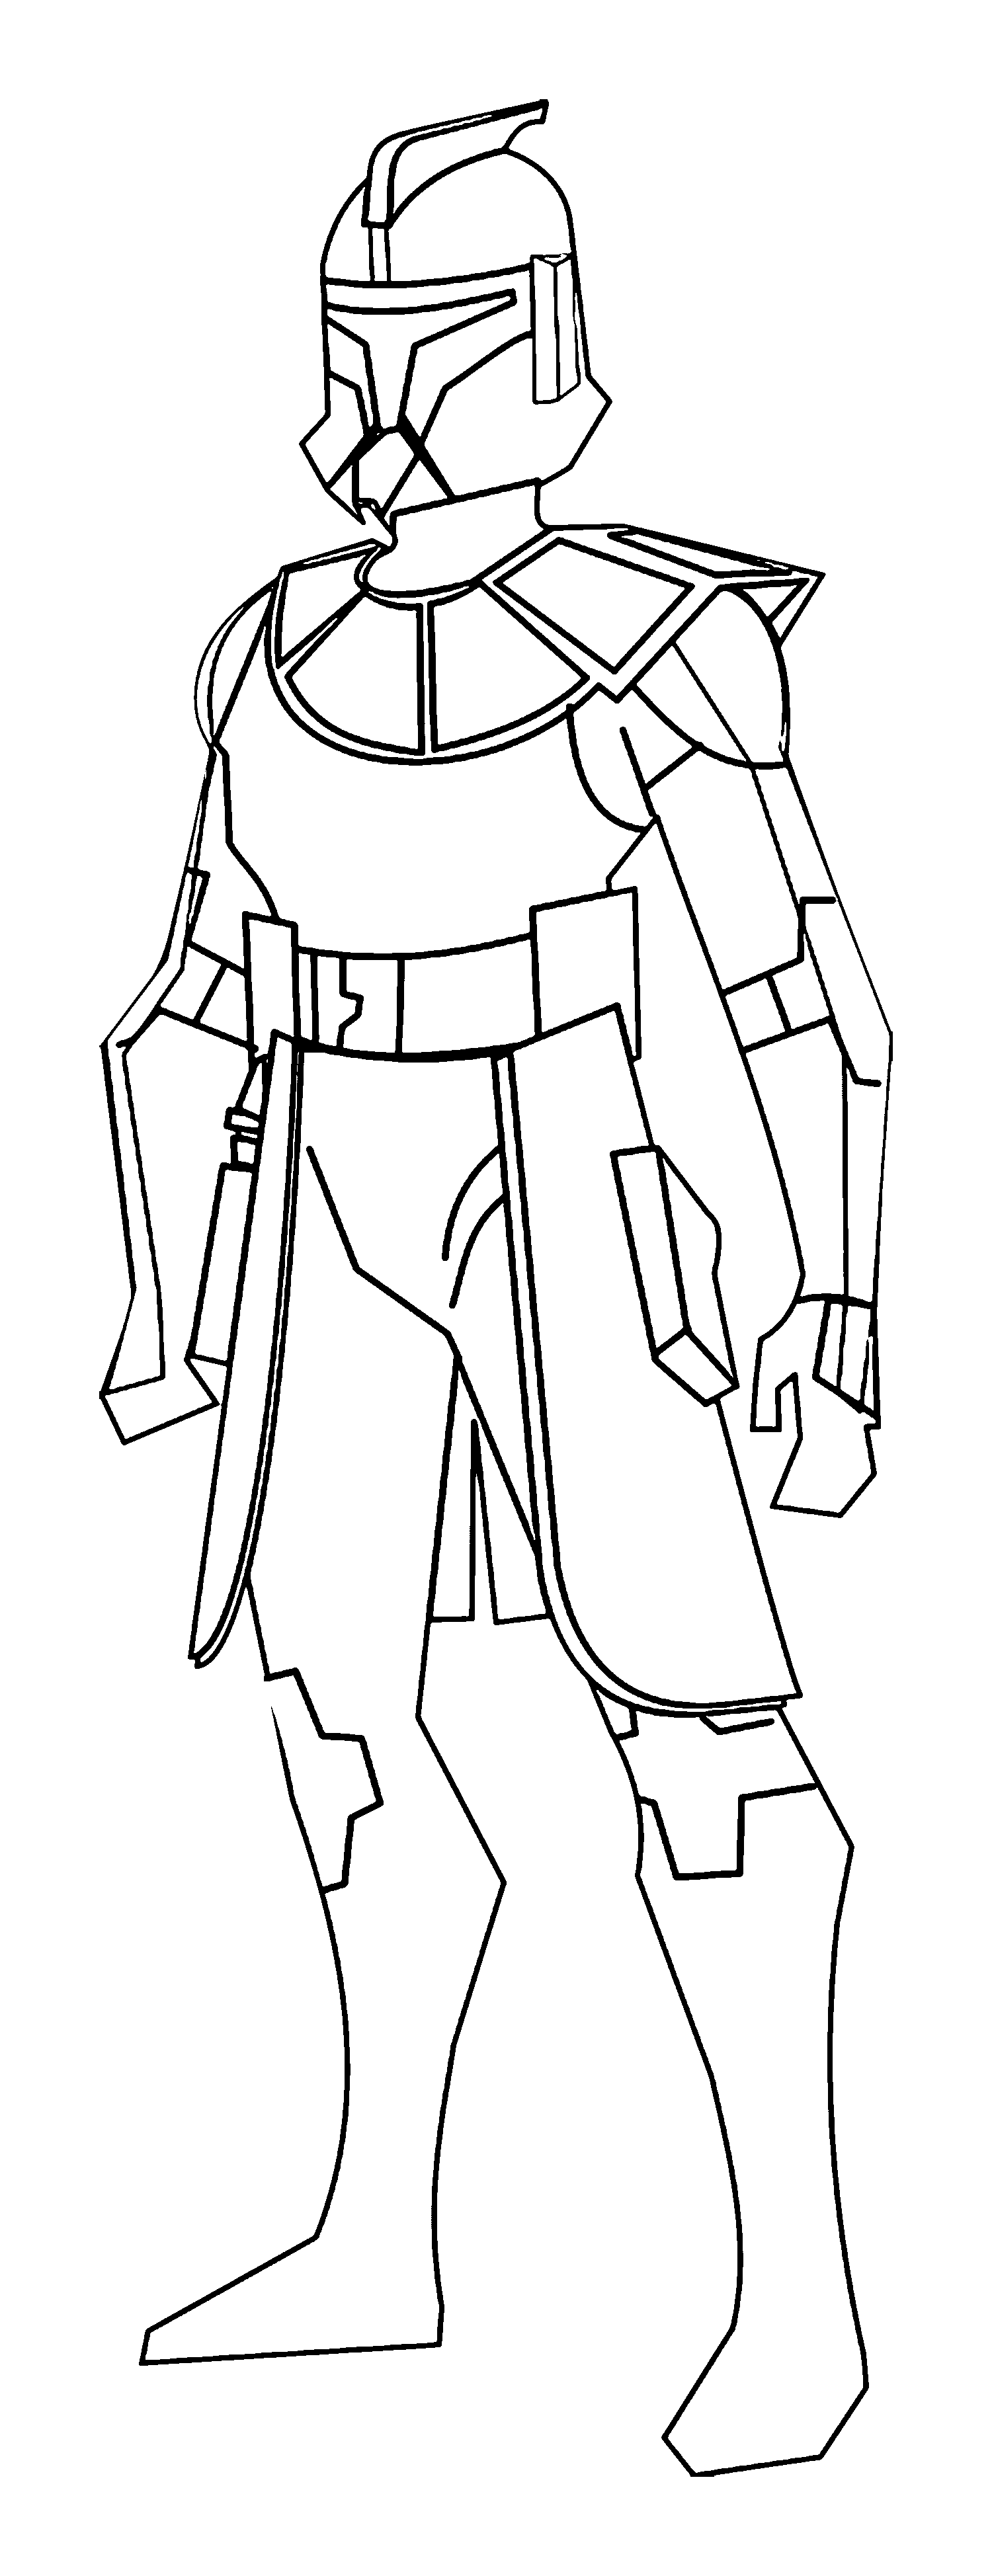 Star Wars Clone Storm Trooper Coloring Page | Wecoloringpage